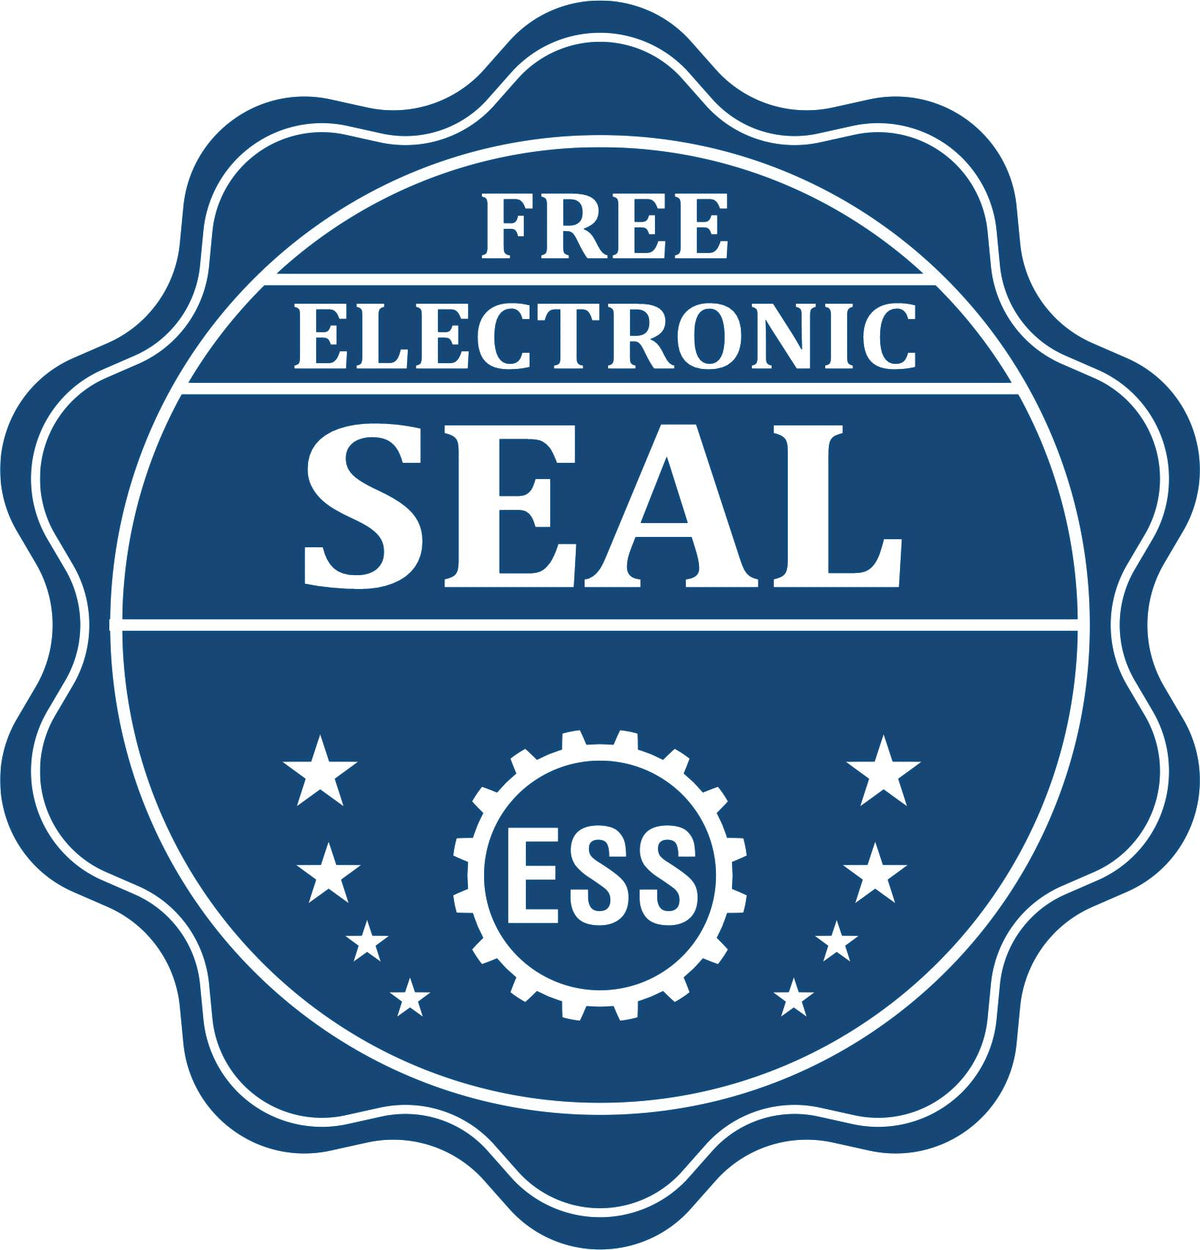 A badge showing a free electronic seal for the Slim Pre-Inked Rectangular Notary Stamp for Illinois with stars and the ESS gear on the emblem.